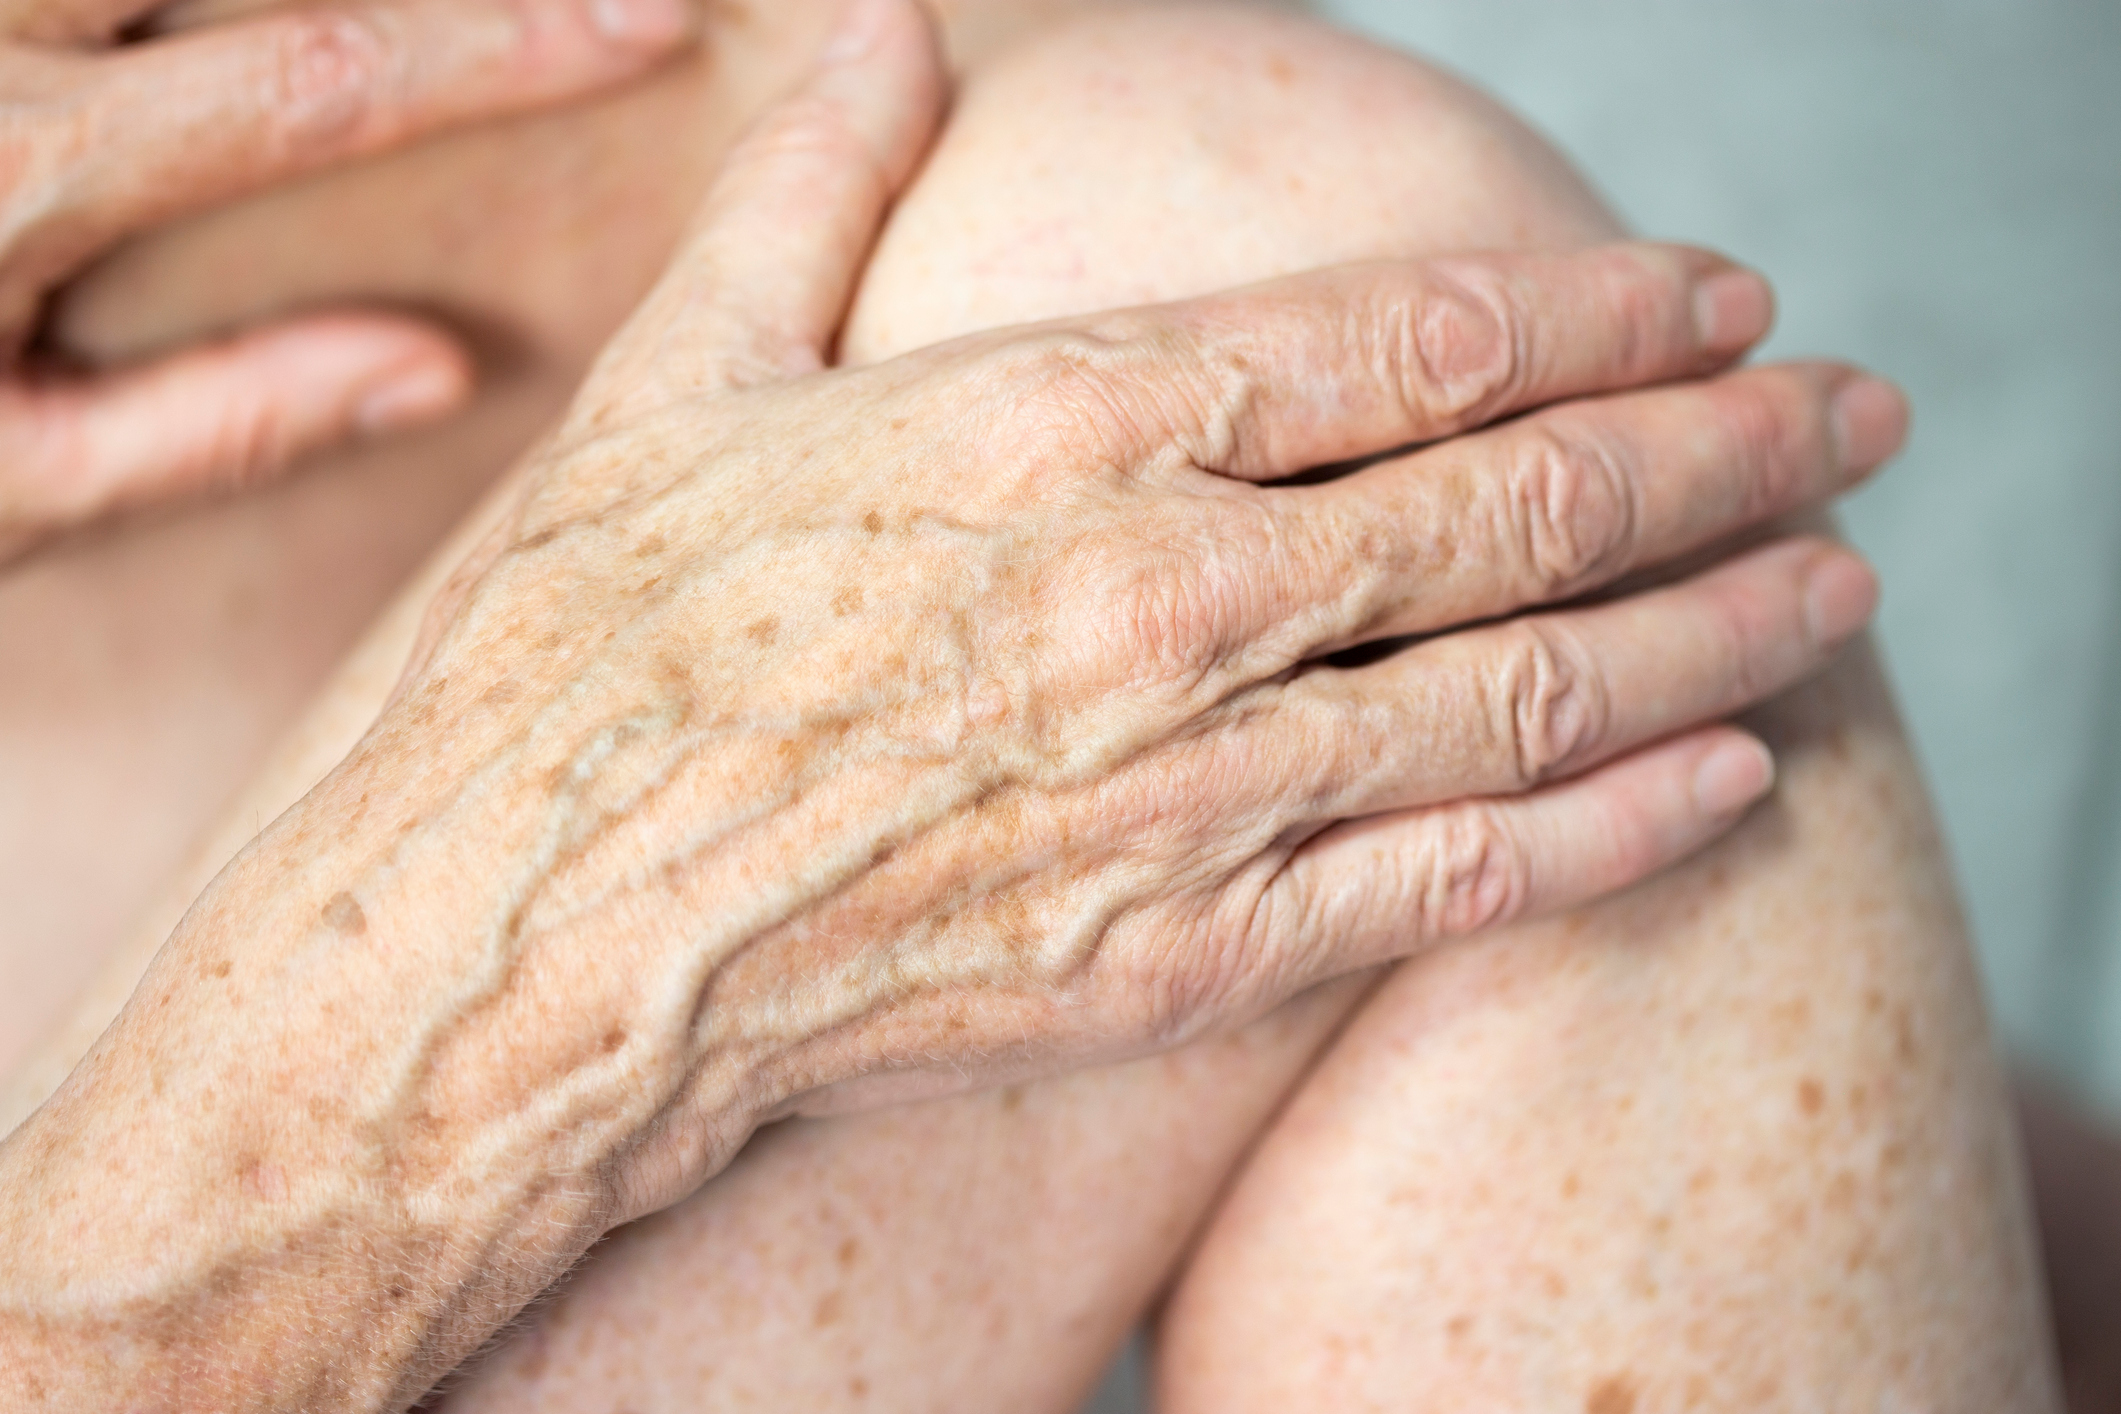 6 Ways To Get Rid Of Age Spots On Your Hands Say Dermatologists